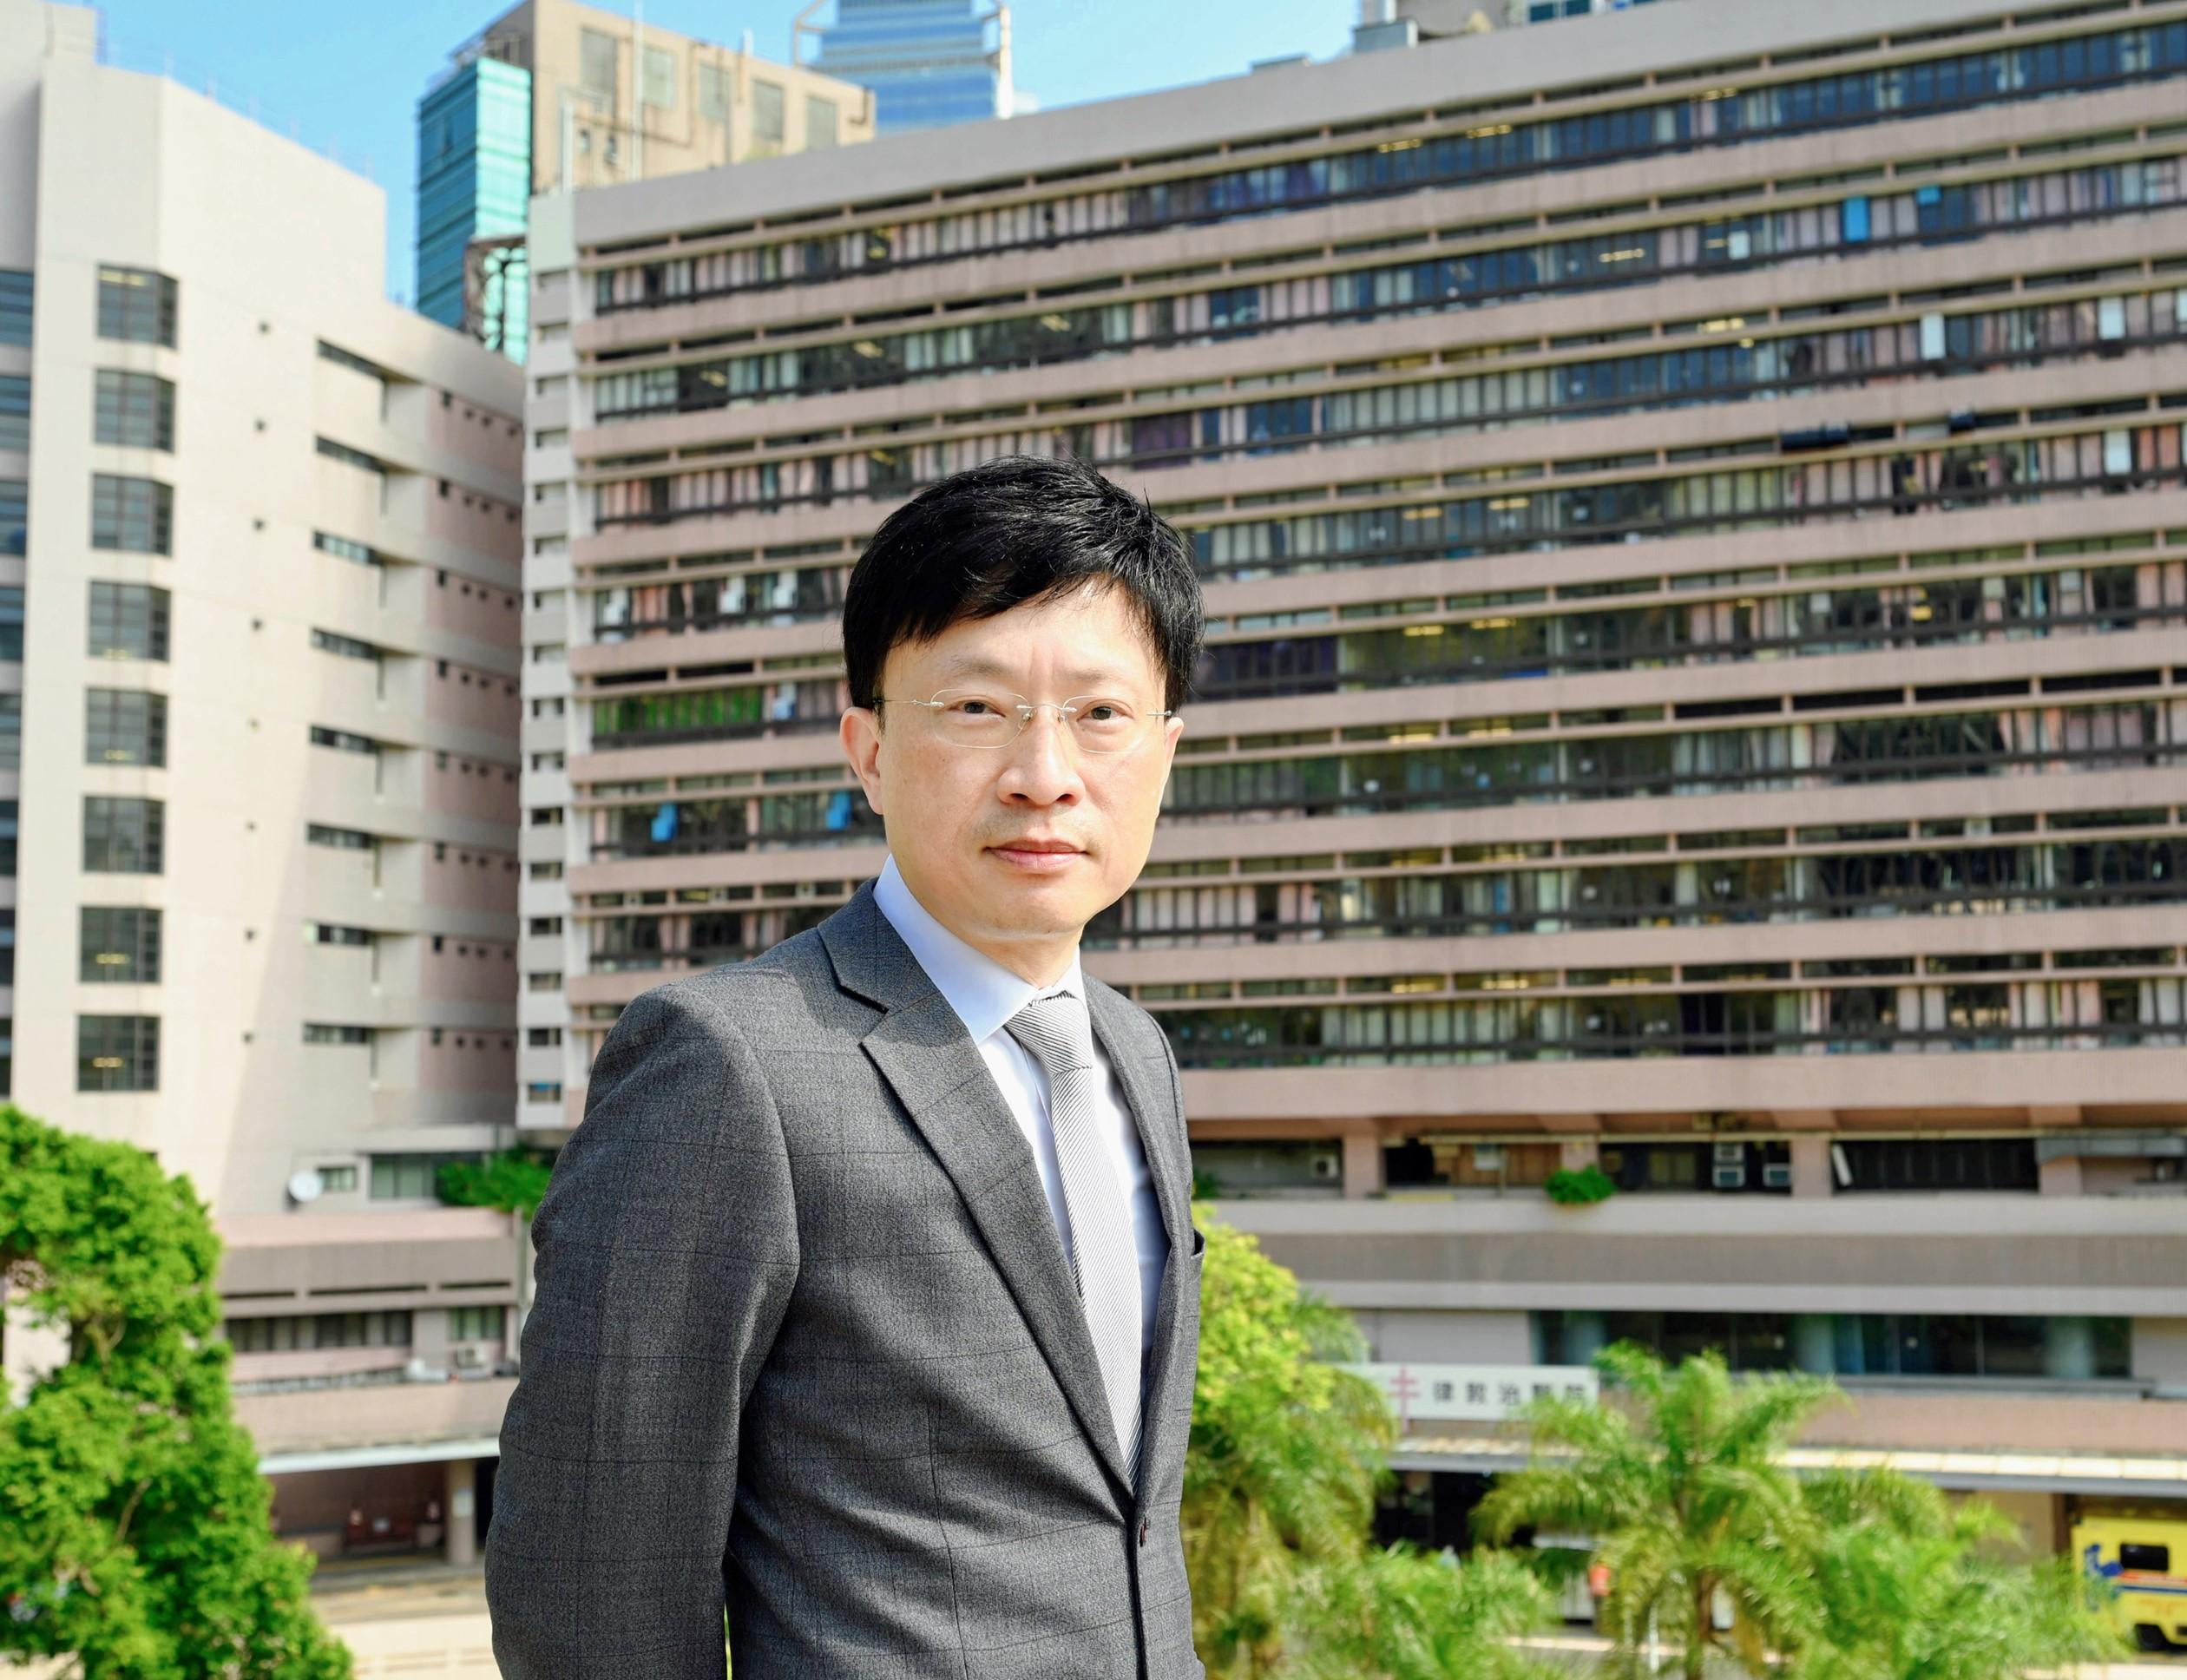 The Hospital Authority announced today (July 28) that Dr Ching Wai-kuen will be appointed as Director (Strategy and Planning) with effect from September 1, 2022.